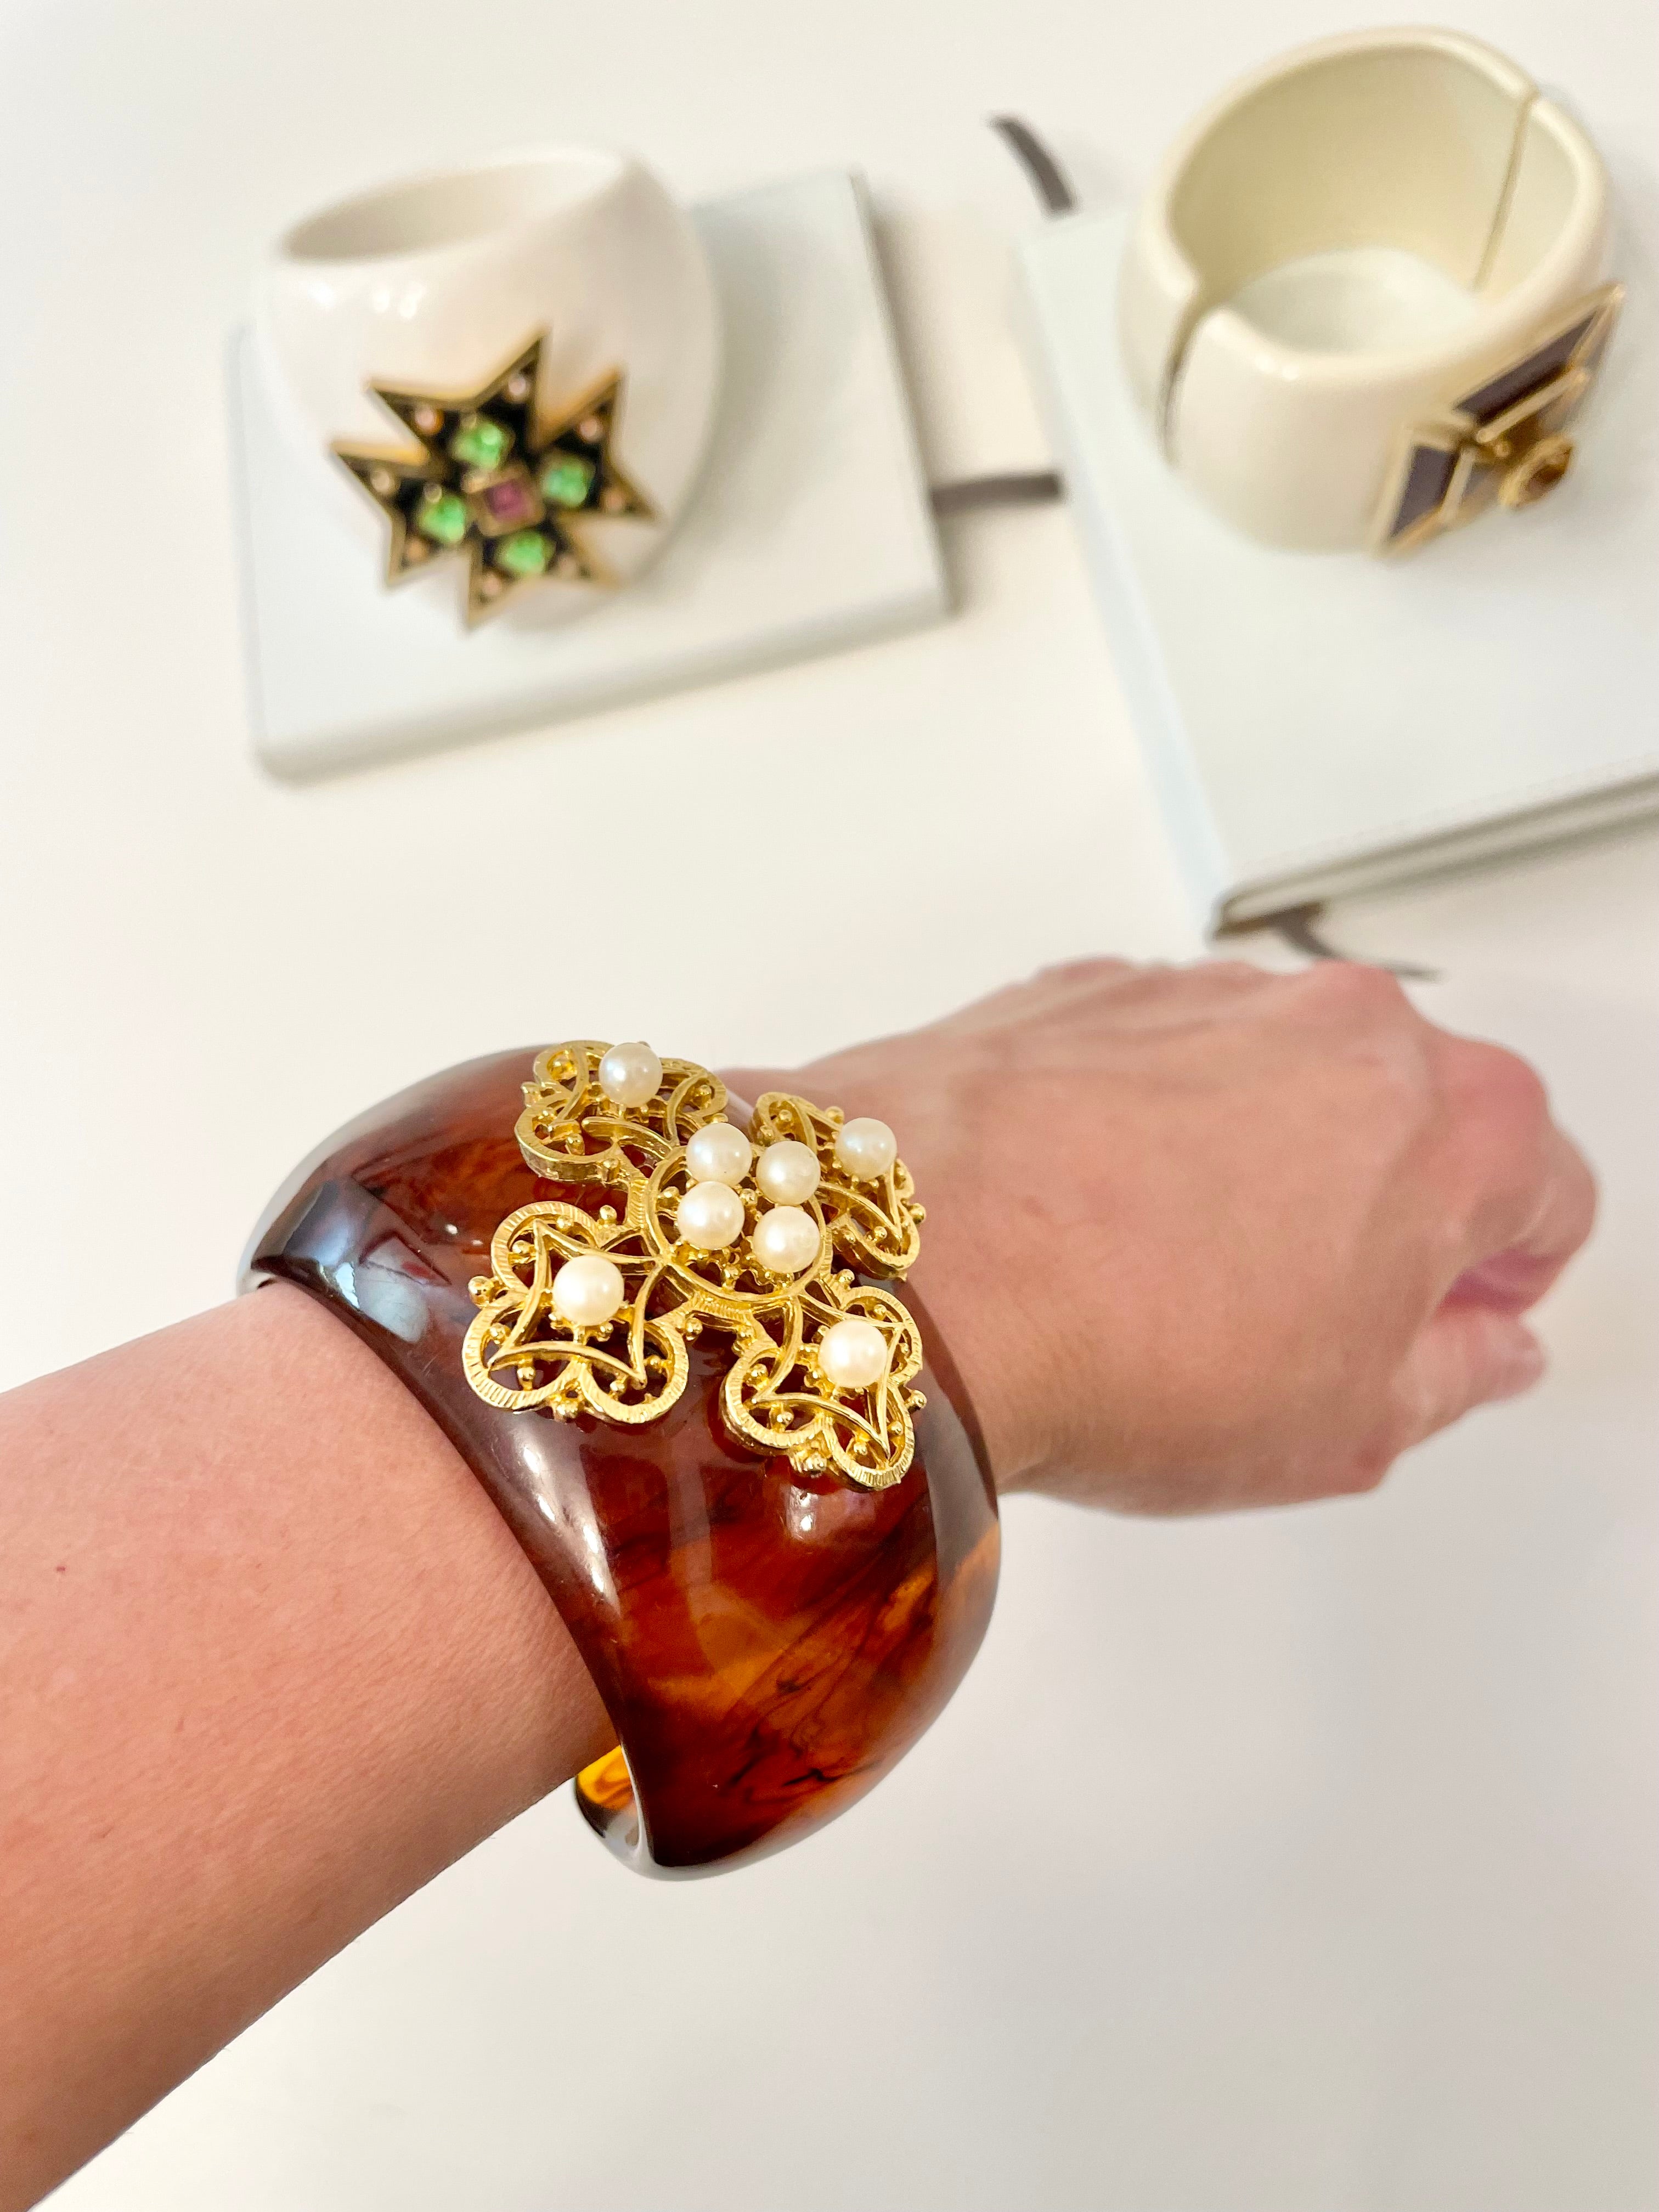 Ladies on Holiday custom resin tortoise cuff, adorned with pearl Maltese cross... so chic